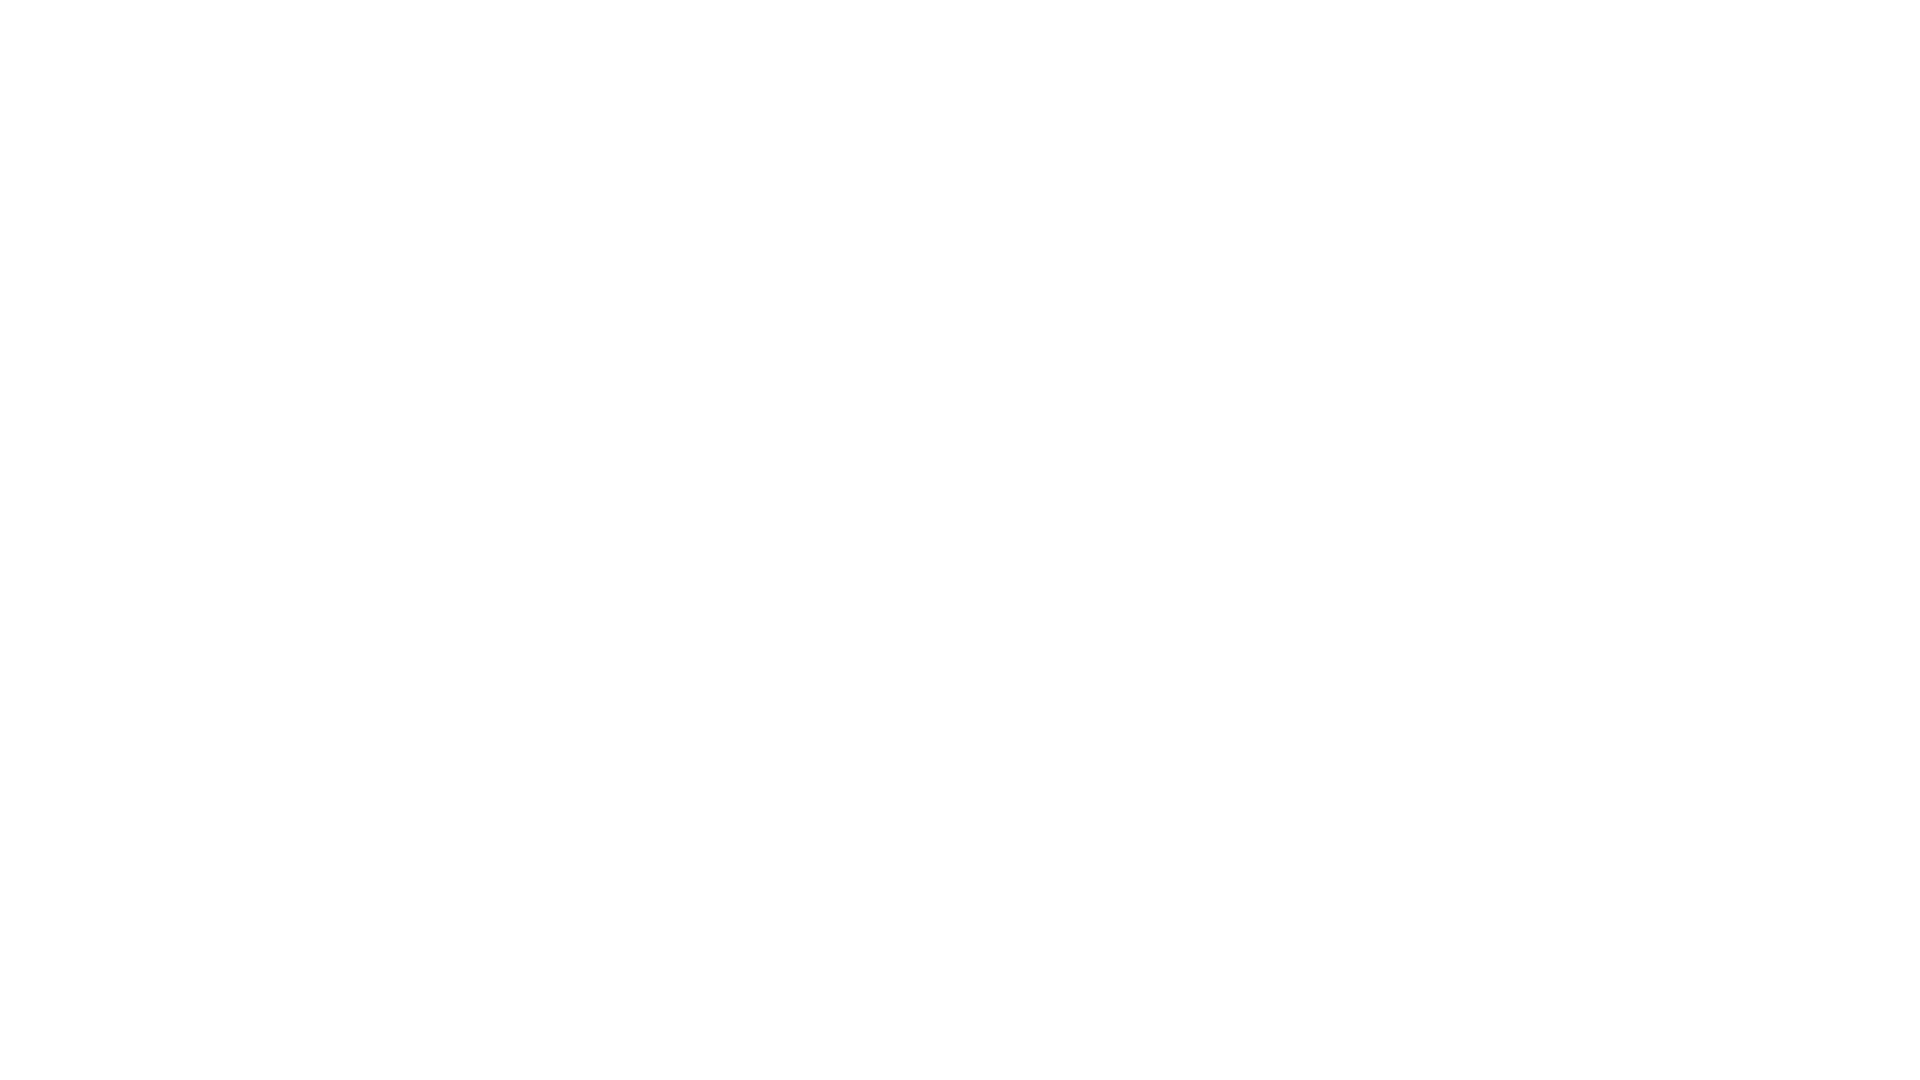 THE COLORED GIRL       